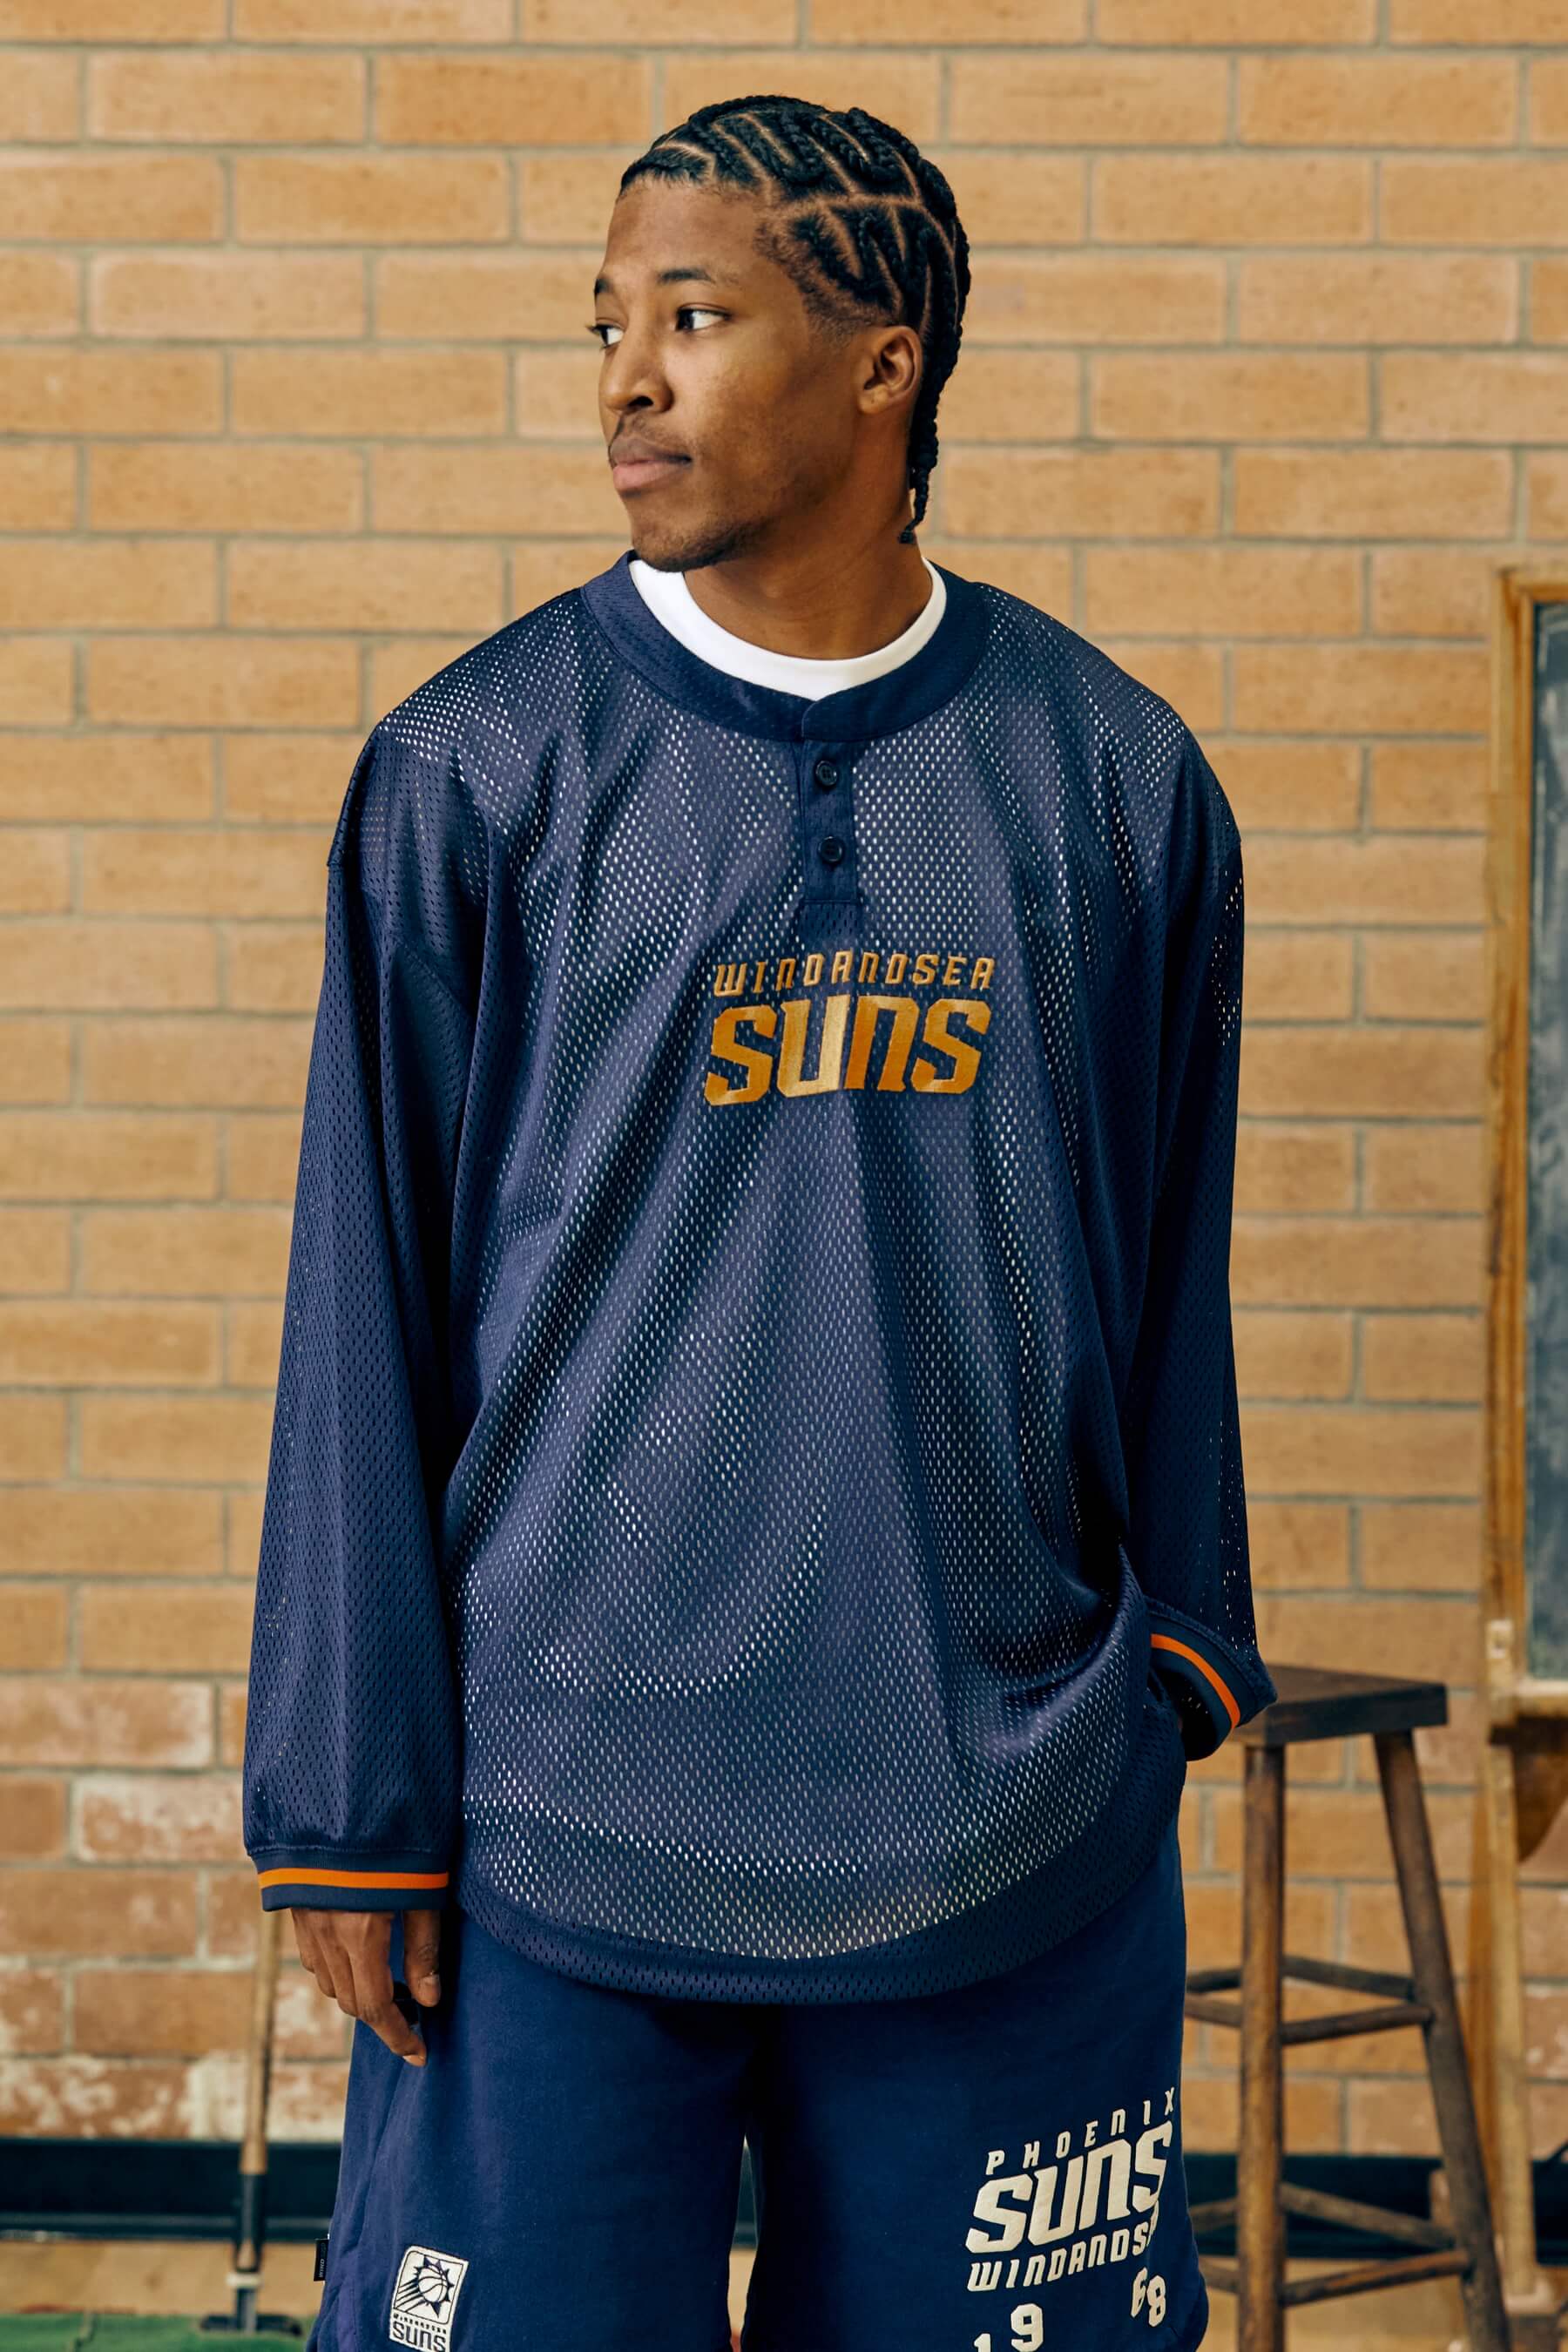 WIND AND SEA x NBA Capsule Collection